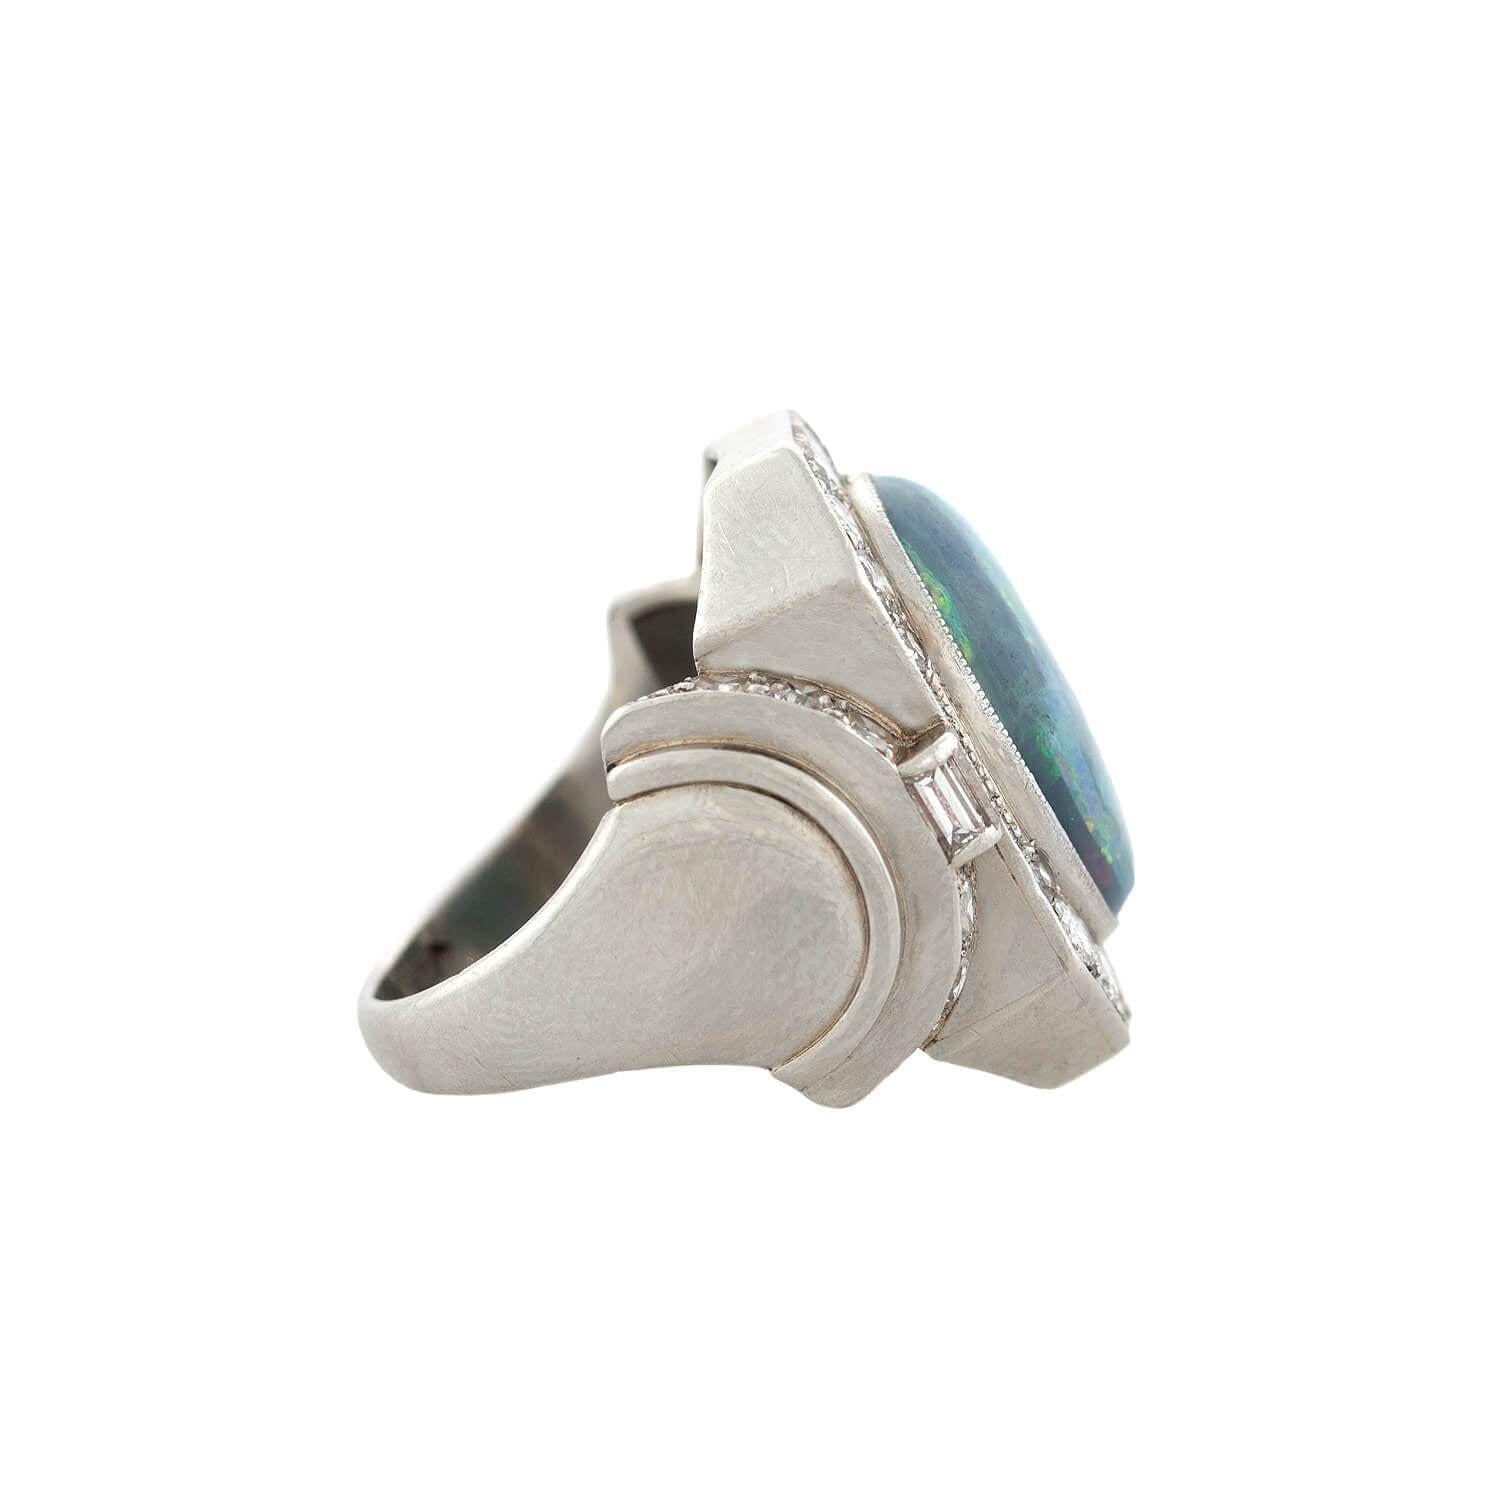 A statement ring from the Art Deco (ca1940s) era! Crafted in 18kt white gold, a Black Opal cabochon rests within a bezel setting. The opal emits an array of rainbow flashes, primary blue and green with bright flecks of red and yellow. The opal's